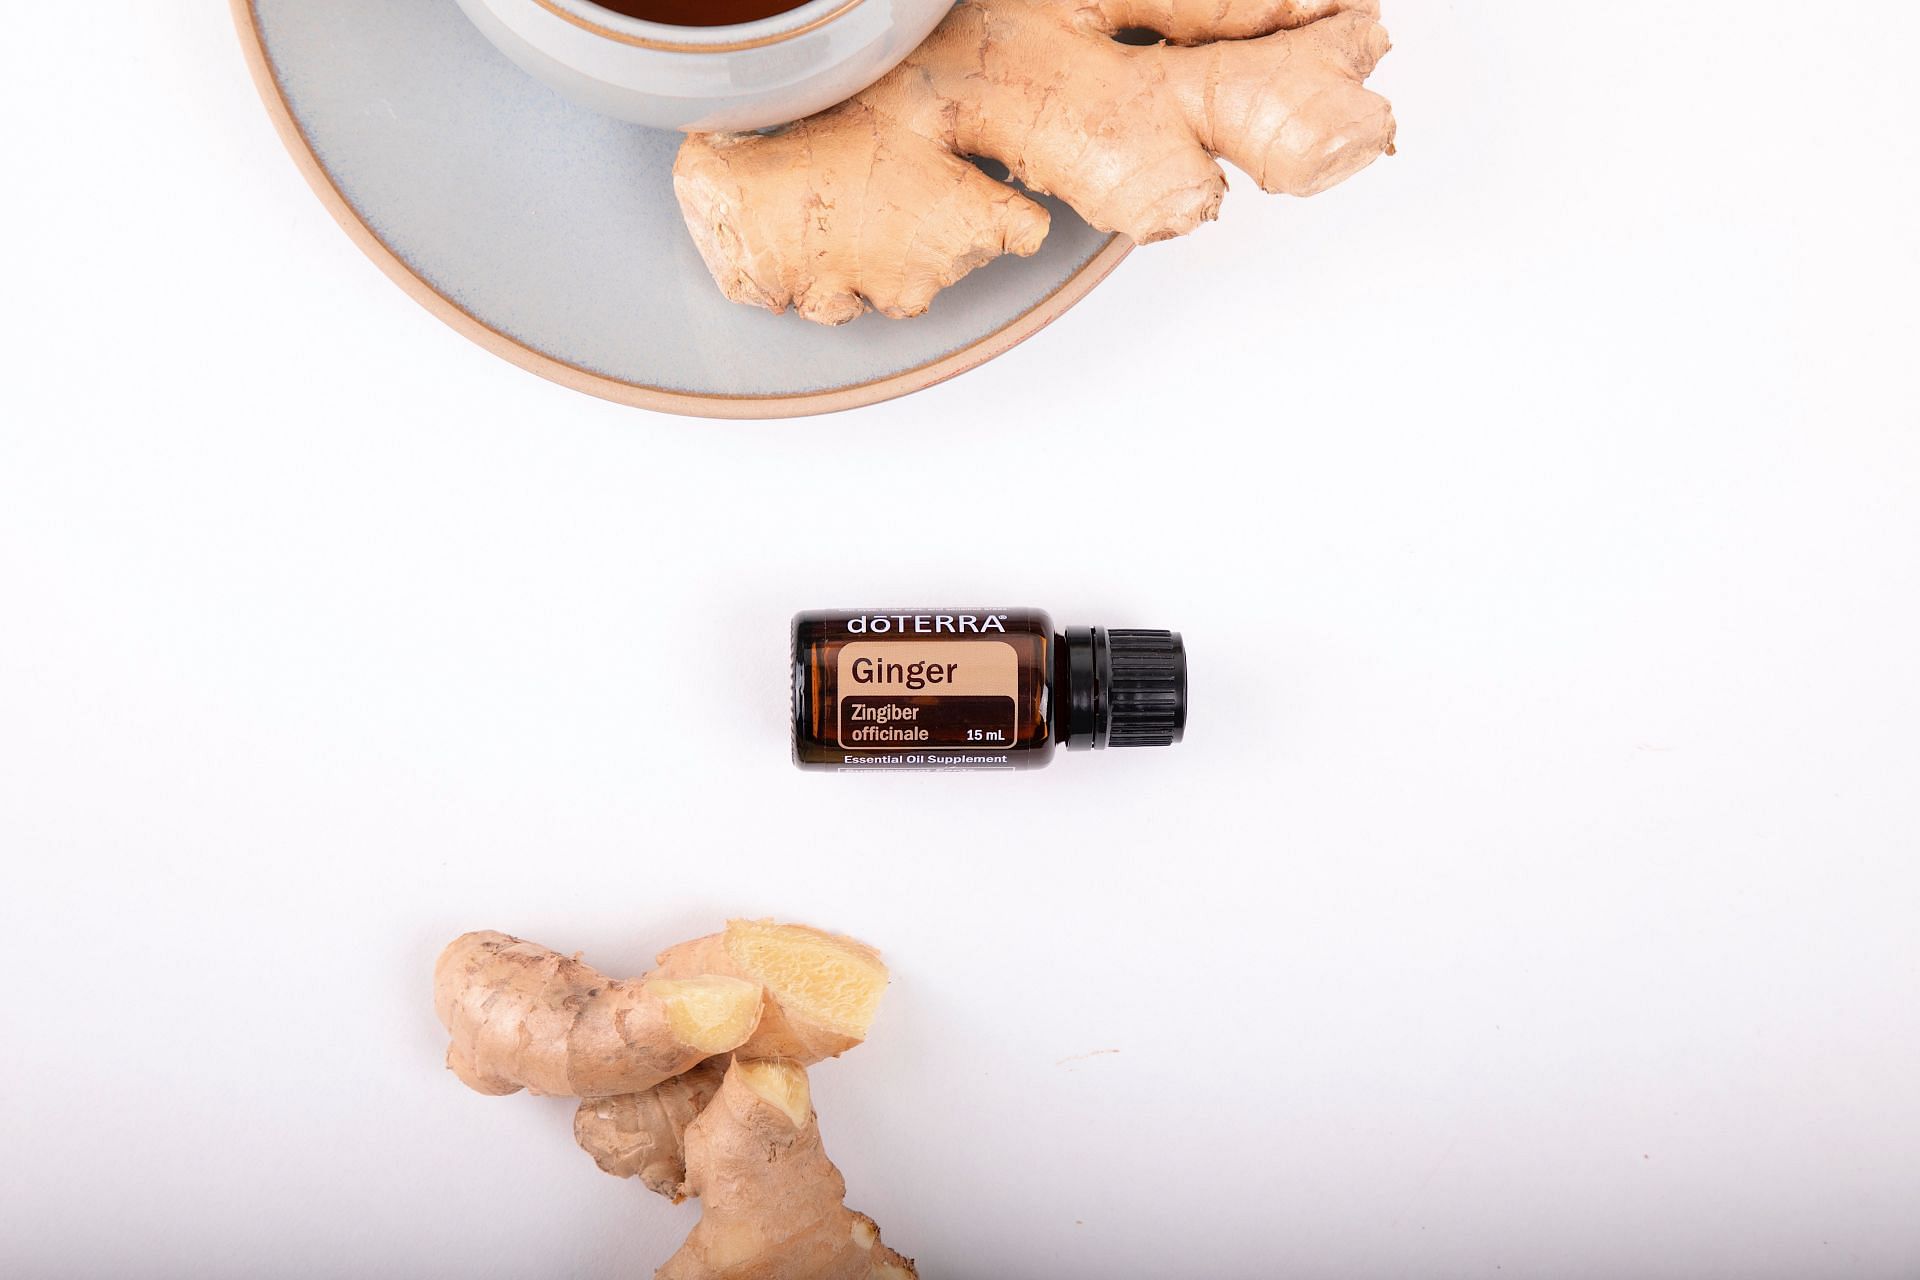 Ginger essential oil is often used for its inflammatory purposes. (Image via Pexels/Doterra International LLC)